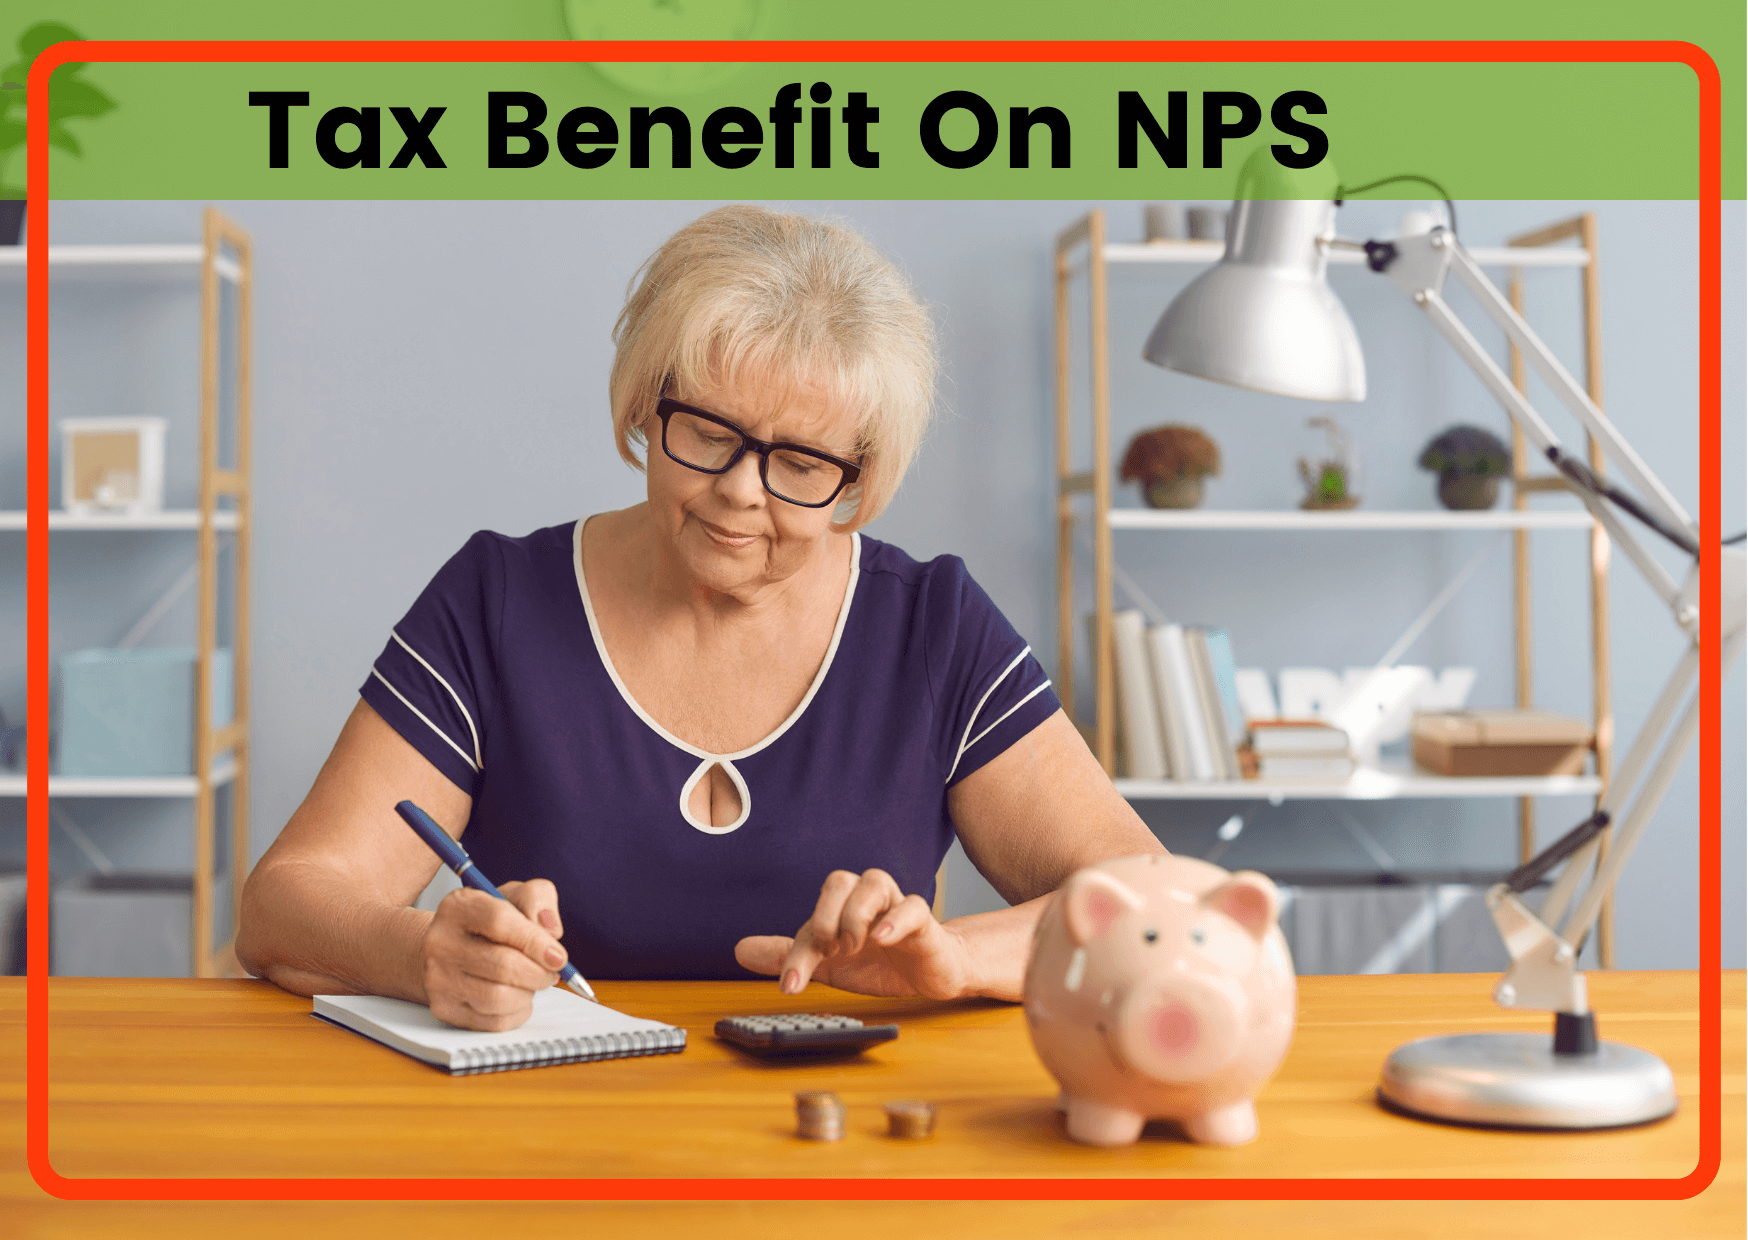 nps-tax-benefit-f-y-2021-22-as-per-old-and-new-tax-regime-with